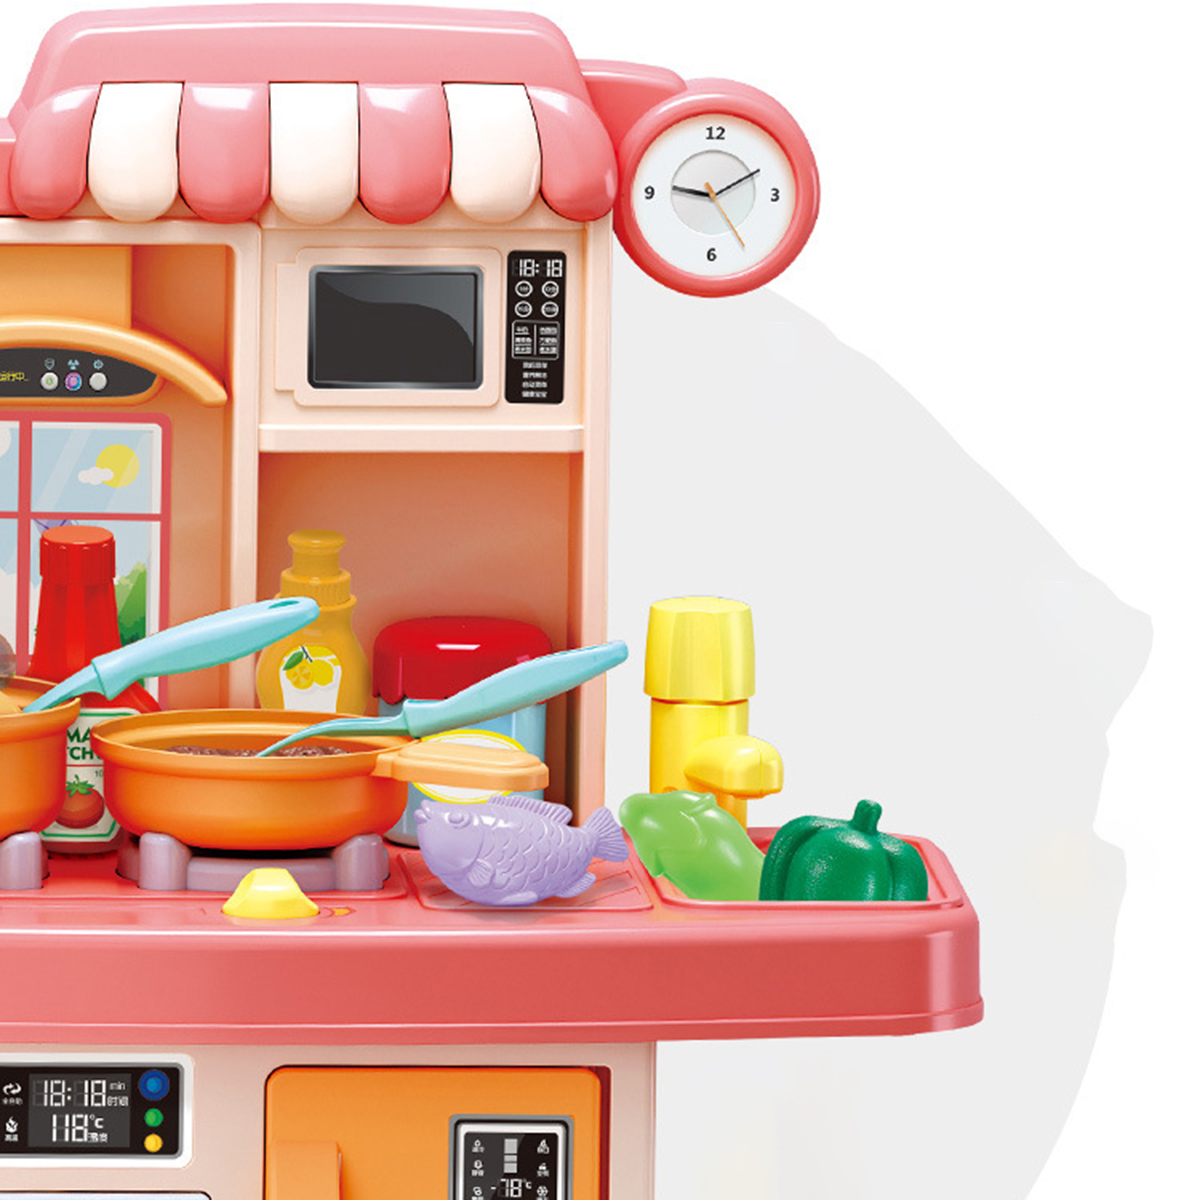 Kids Kitchenware Cooking Set Play For Toddler Pretend Play Toy Kitchen Playset 